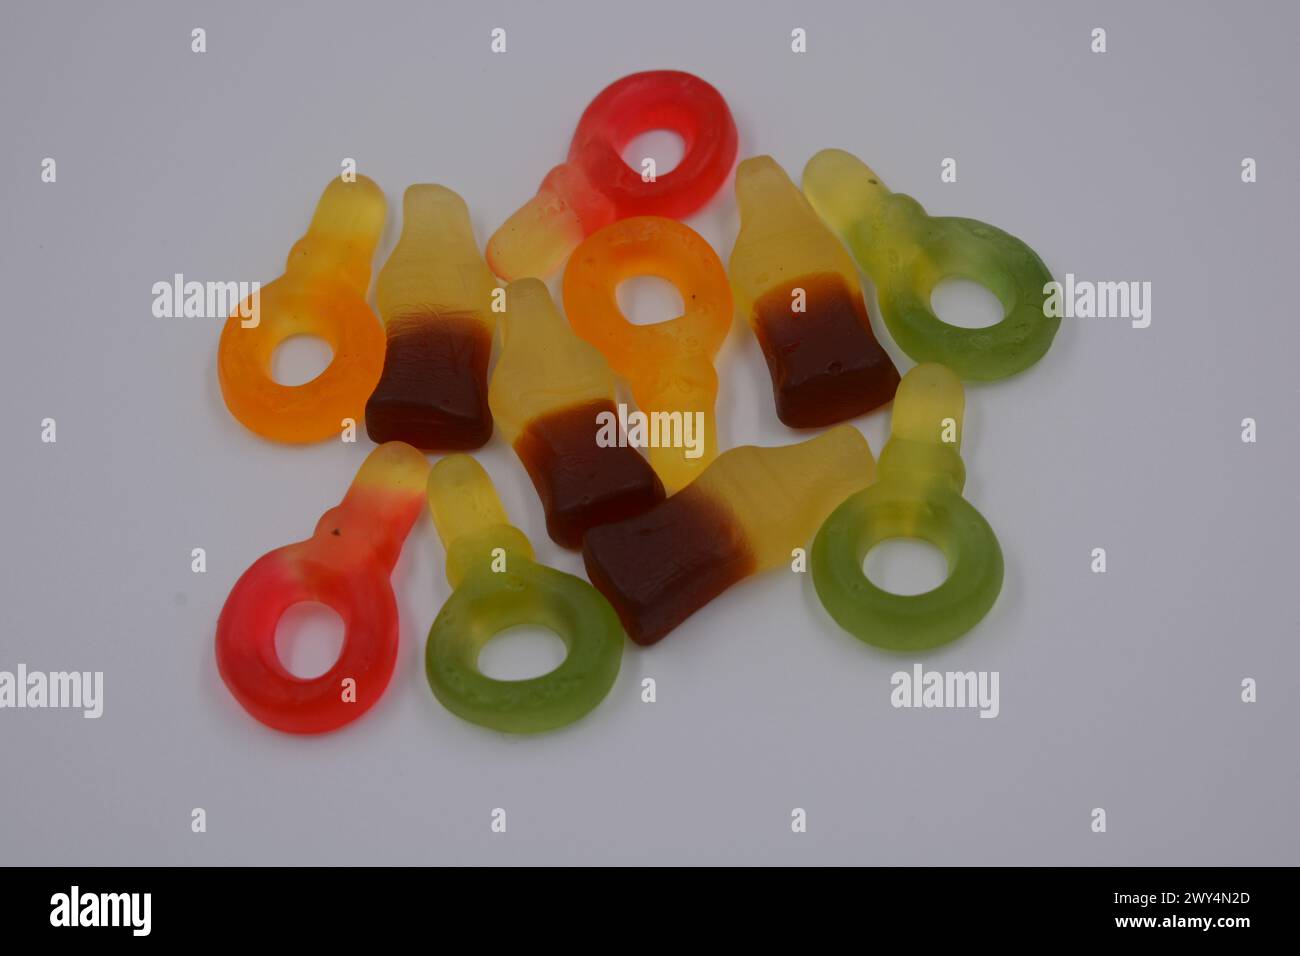 Beautiful and unusual candies. Yellow-green, red, brown, sweets in the form of a bottle of Coca-Cola, colored keys arranged on a white plastic backgro Stock Photo